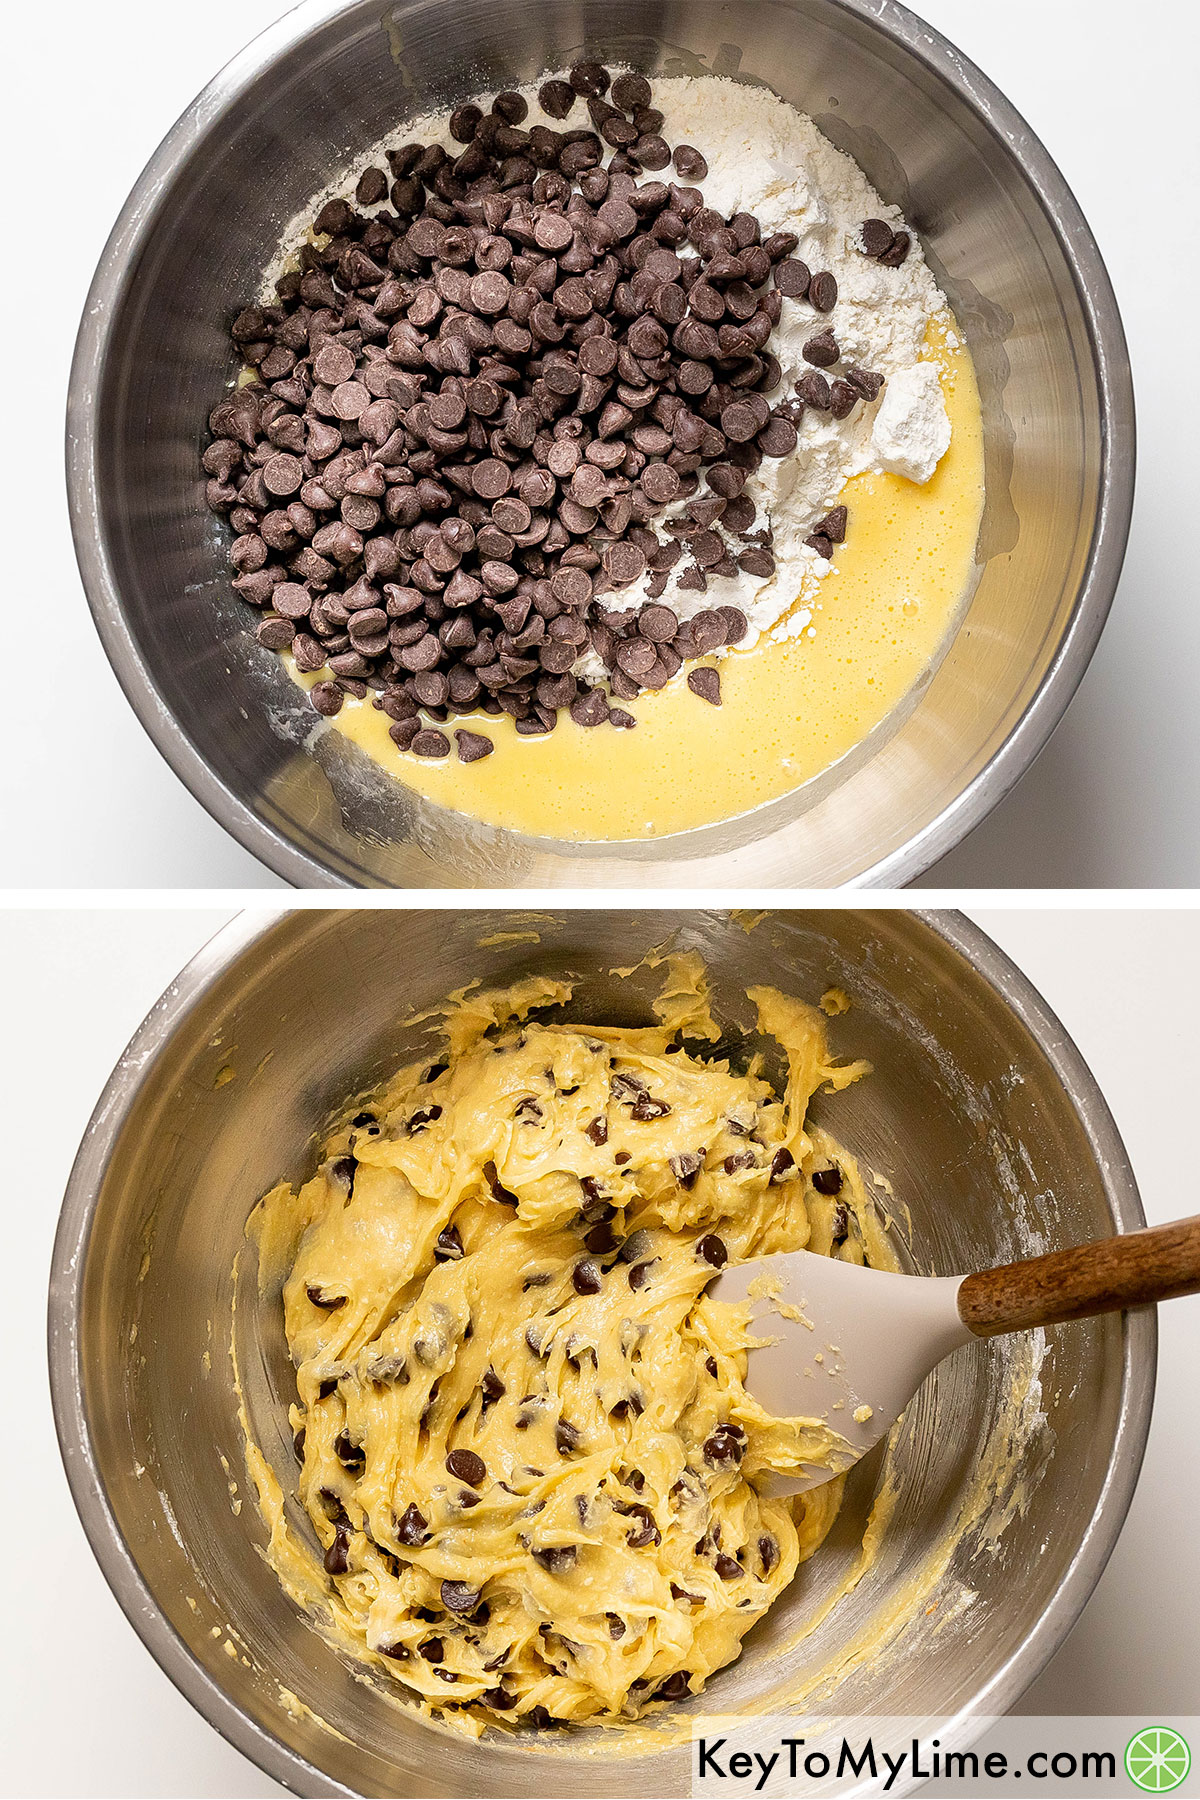 Adding chocolate chips and cake mix and then thoroughly mixing together.